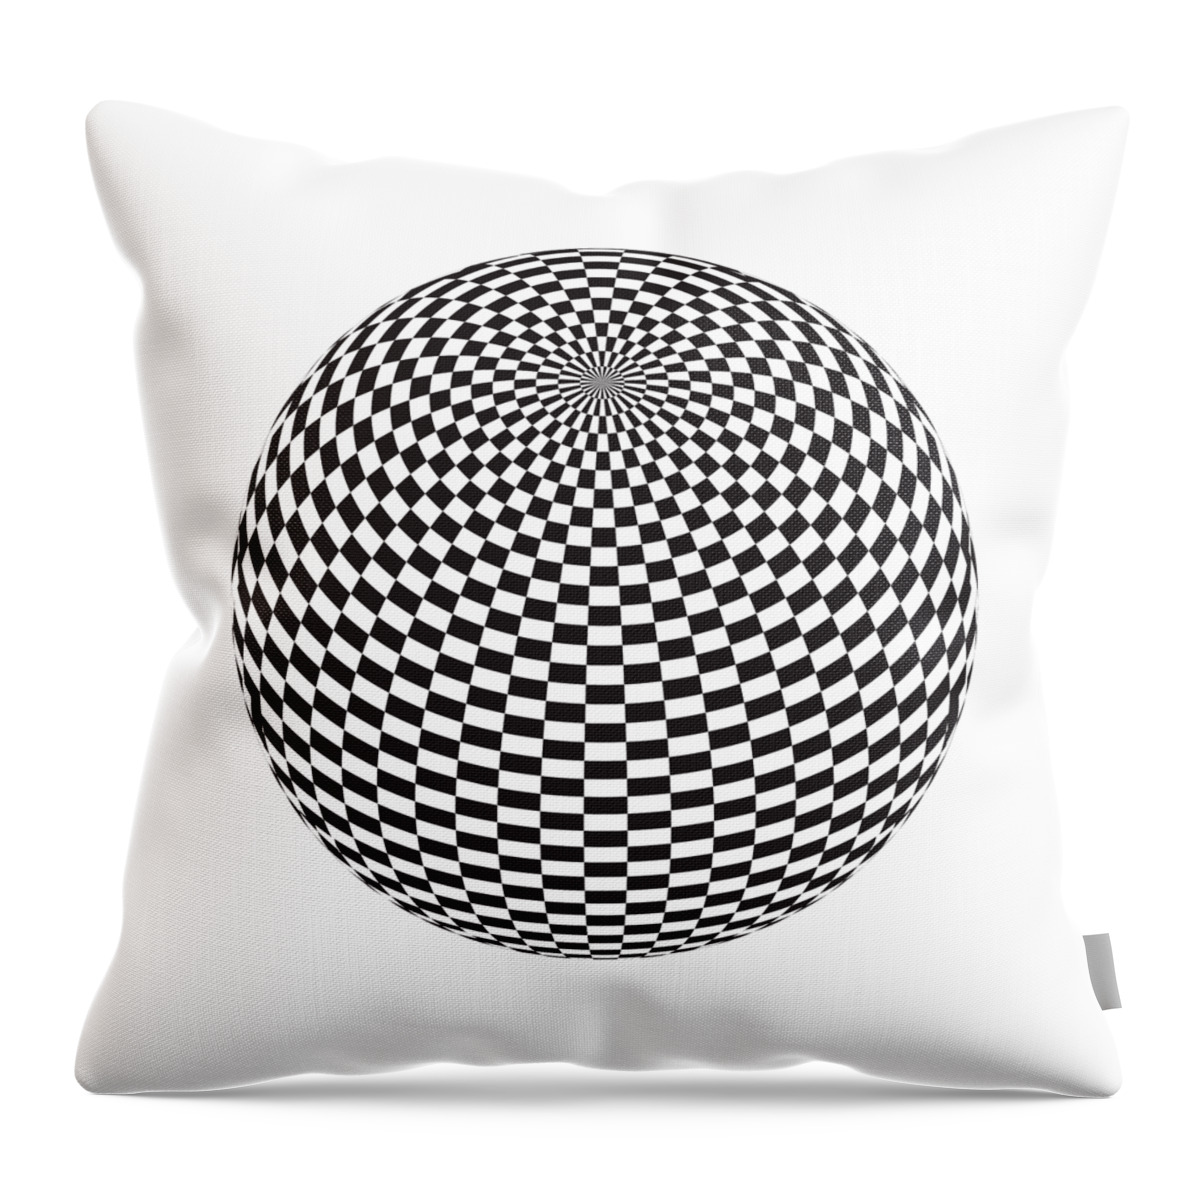 Abstract Throw Pillow featuring the digital art Squares On The Ball by Michal Boubin